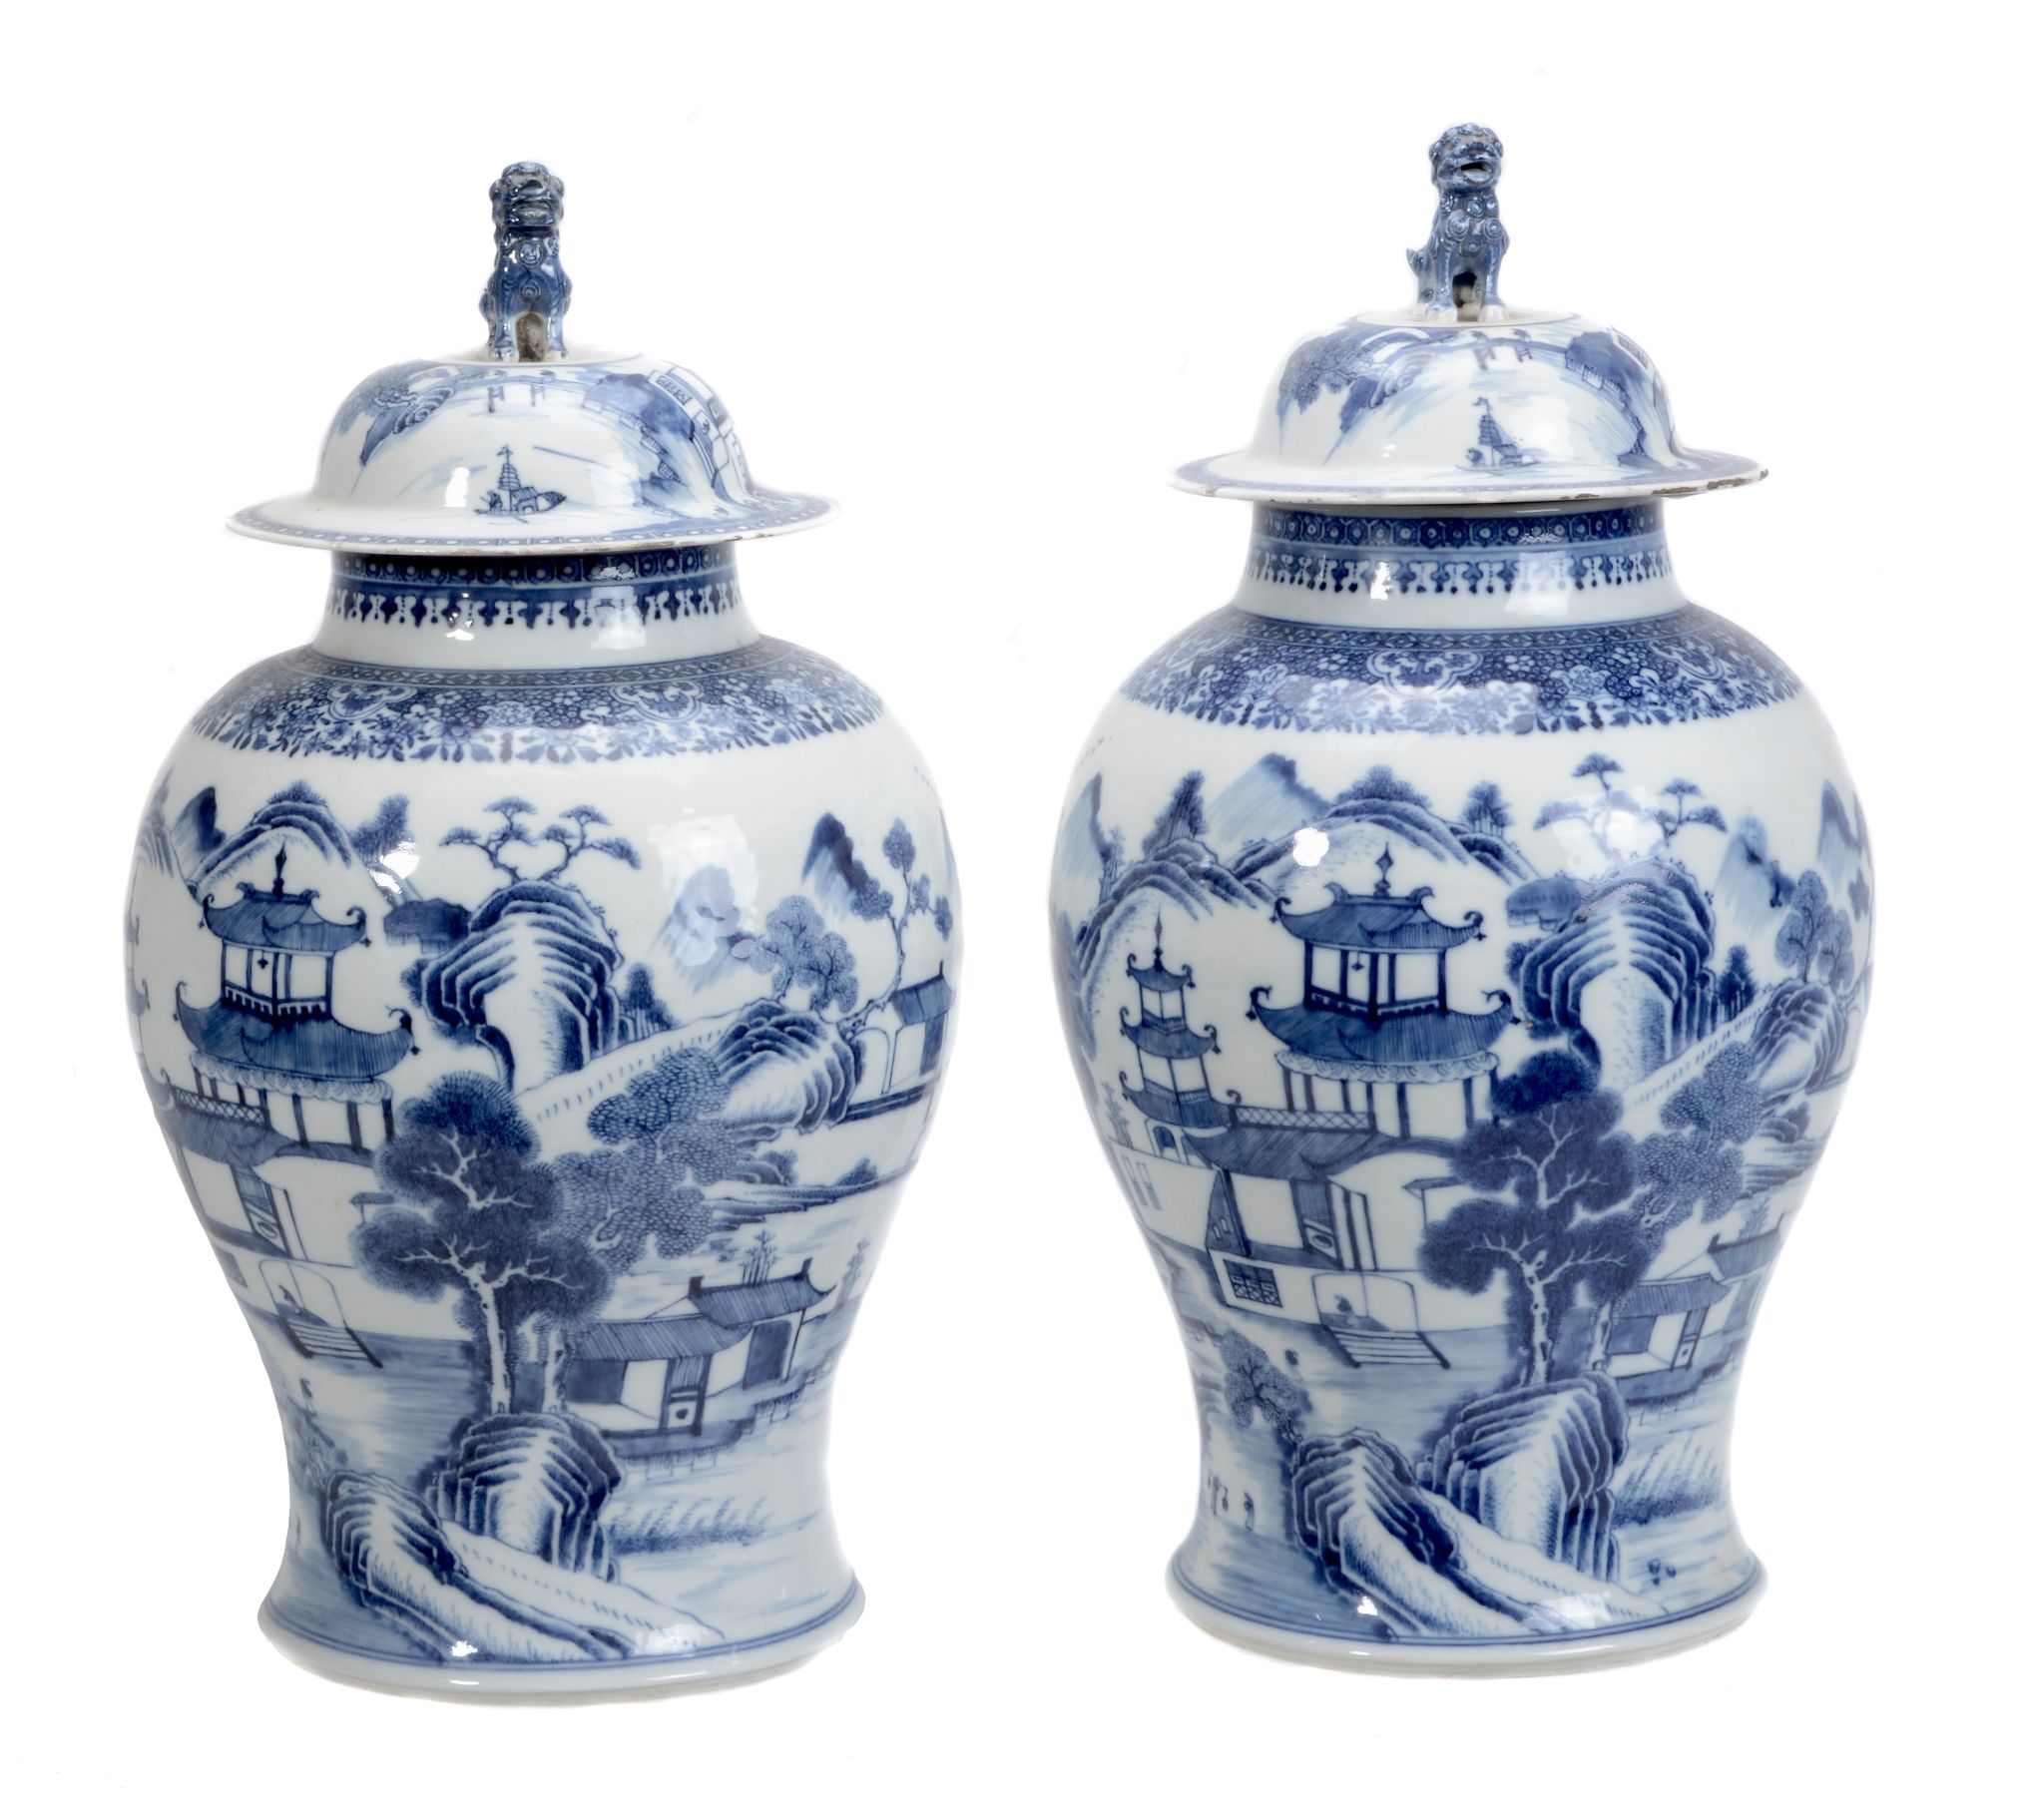 A pair of Chinese blue and white jars and covers of baluster shape decorated with lakeside scenes